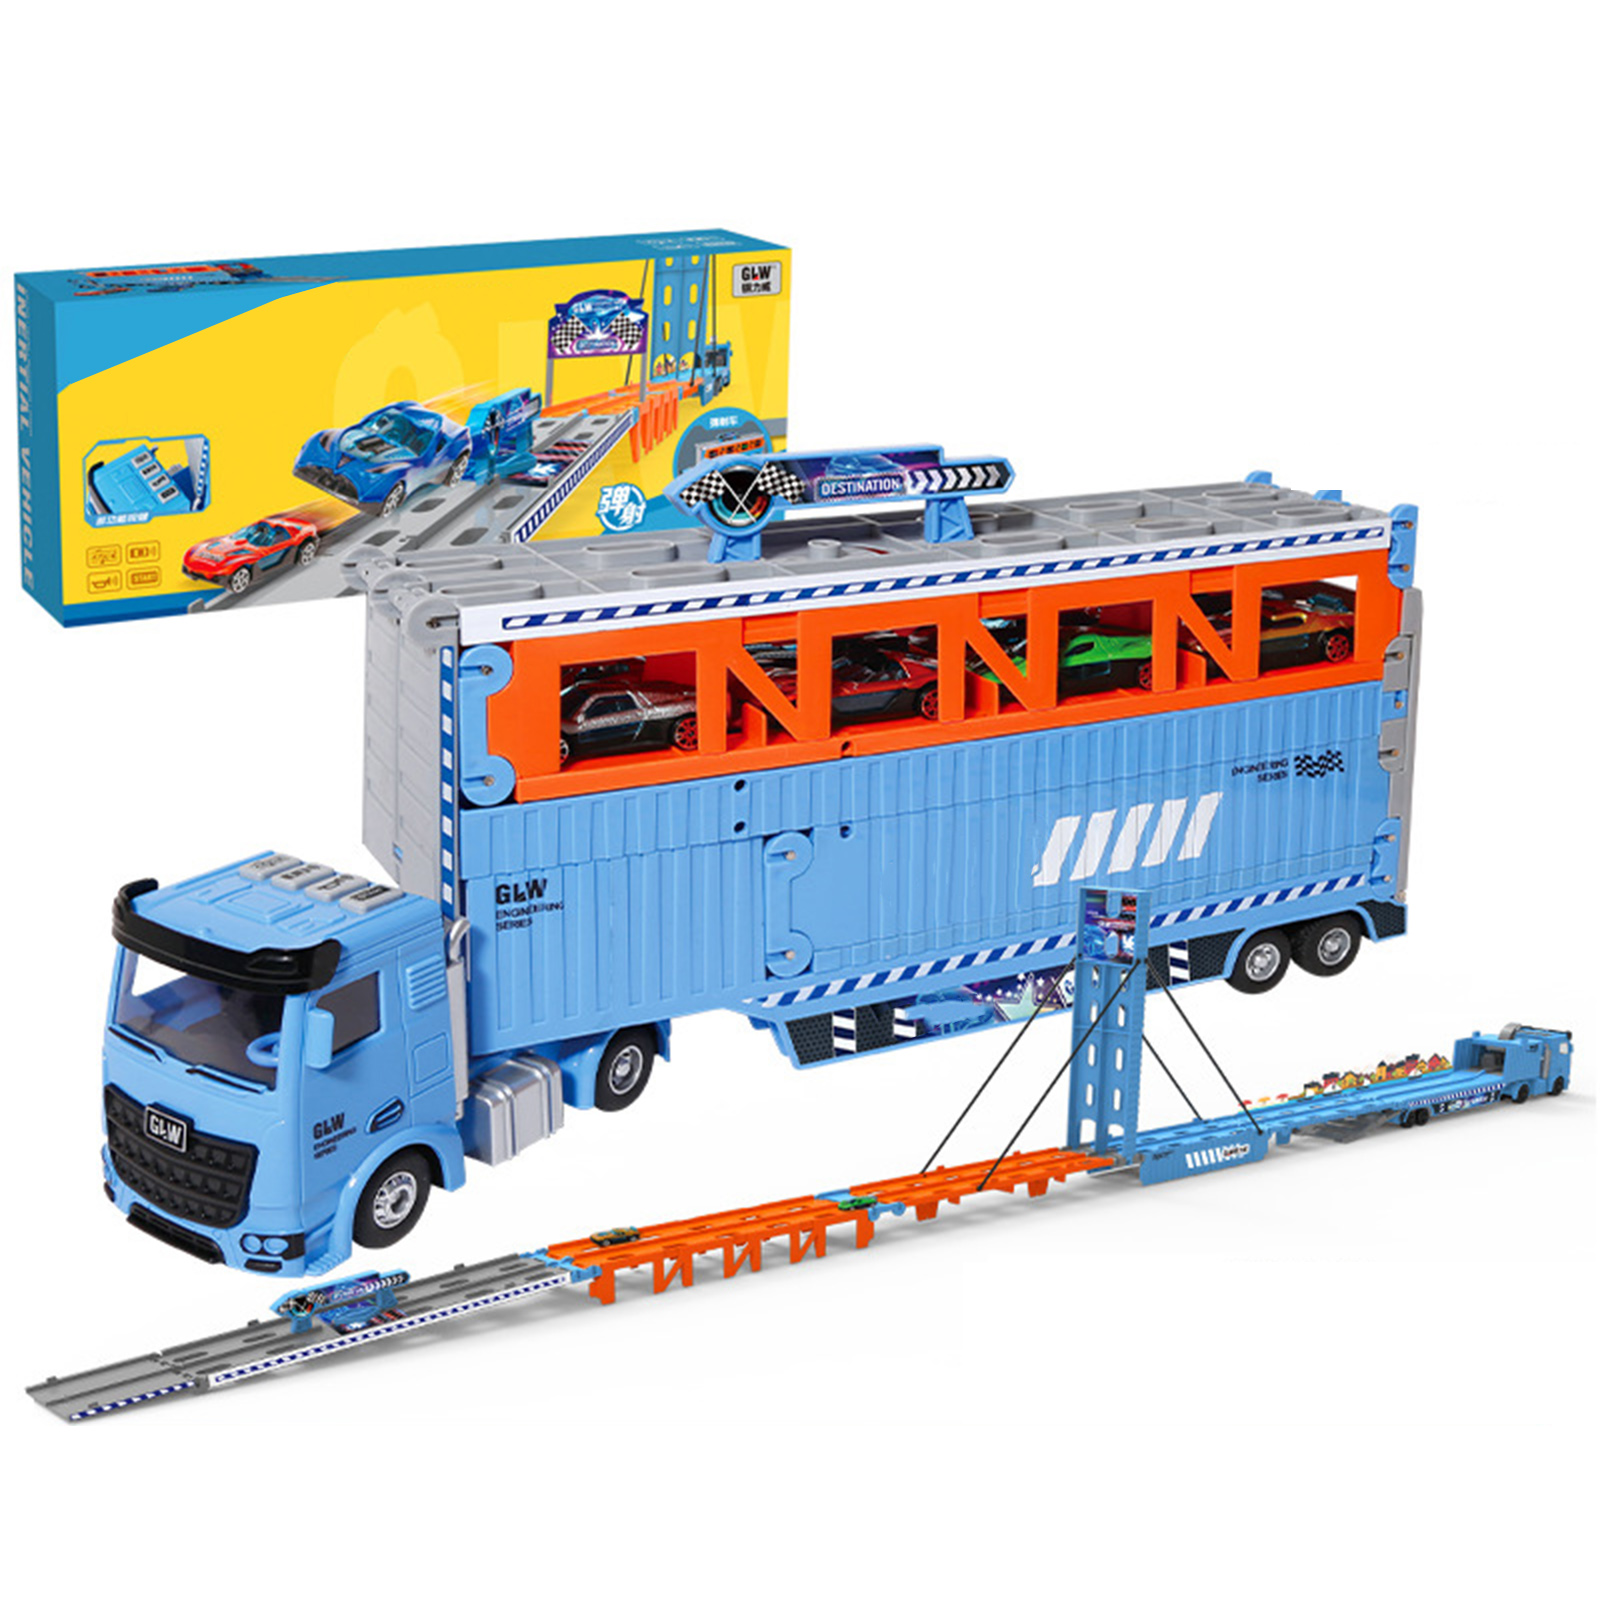 Transport Carrier Truck Car Toy With Mini Cars Catapulting Transporter Truck Play Set Birthday Gifts Gifts For Boys Girls